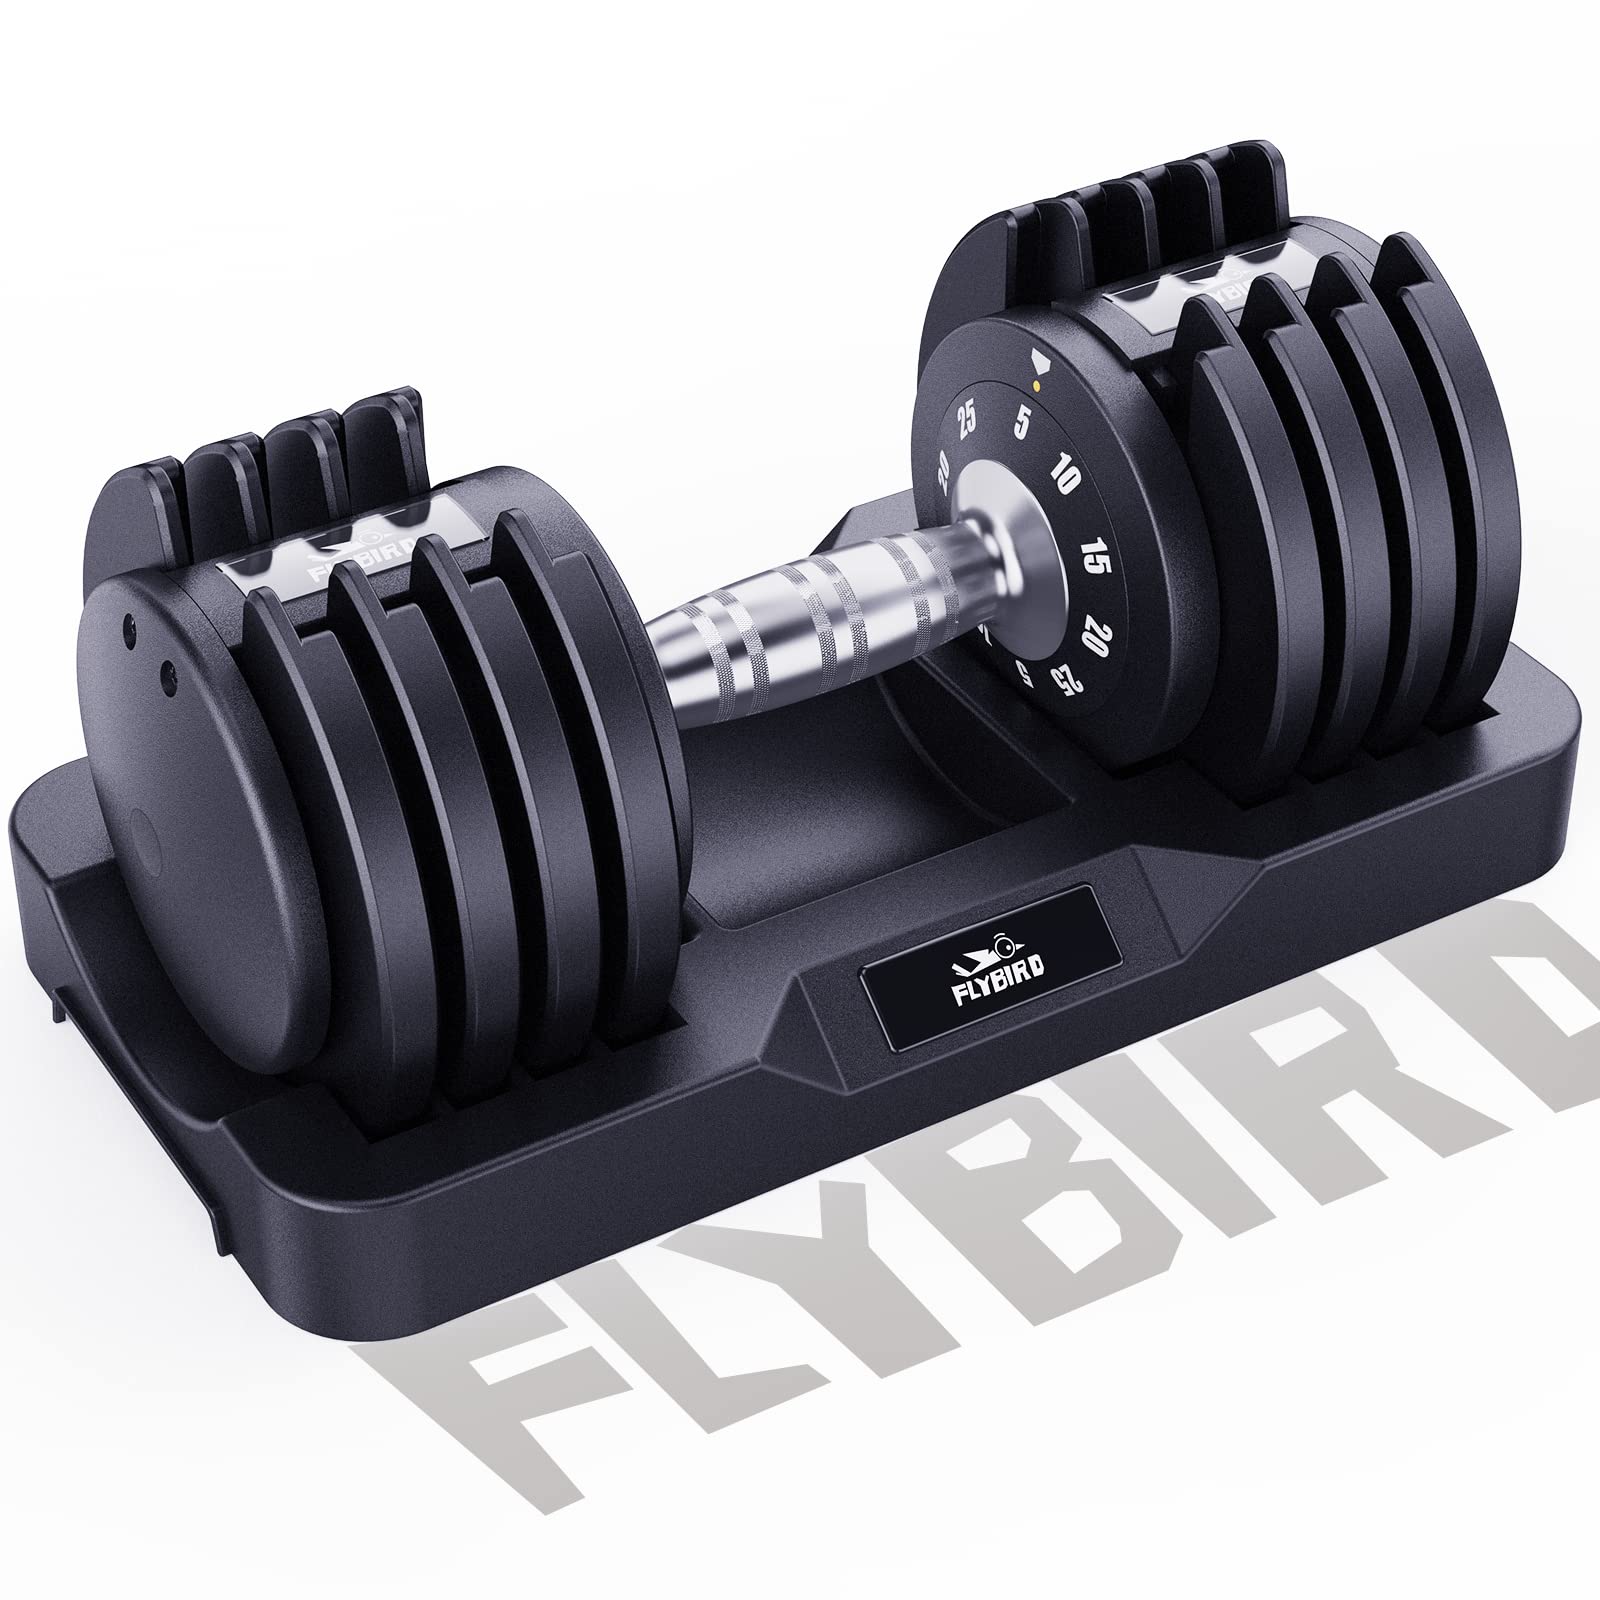 FLYBIRD Adjustable Dumbbell,25/50/55lb Dumbbell for Men and Women with Anti-Slip Metal Handle,Fast Adjust Weight by Turning Handle,Black Dumbbell with Tray Suitable for Full Body Workout Fitness